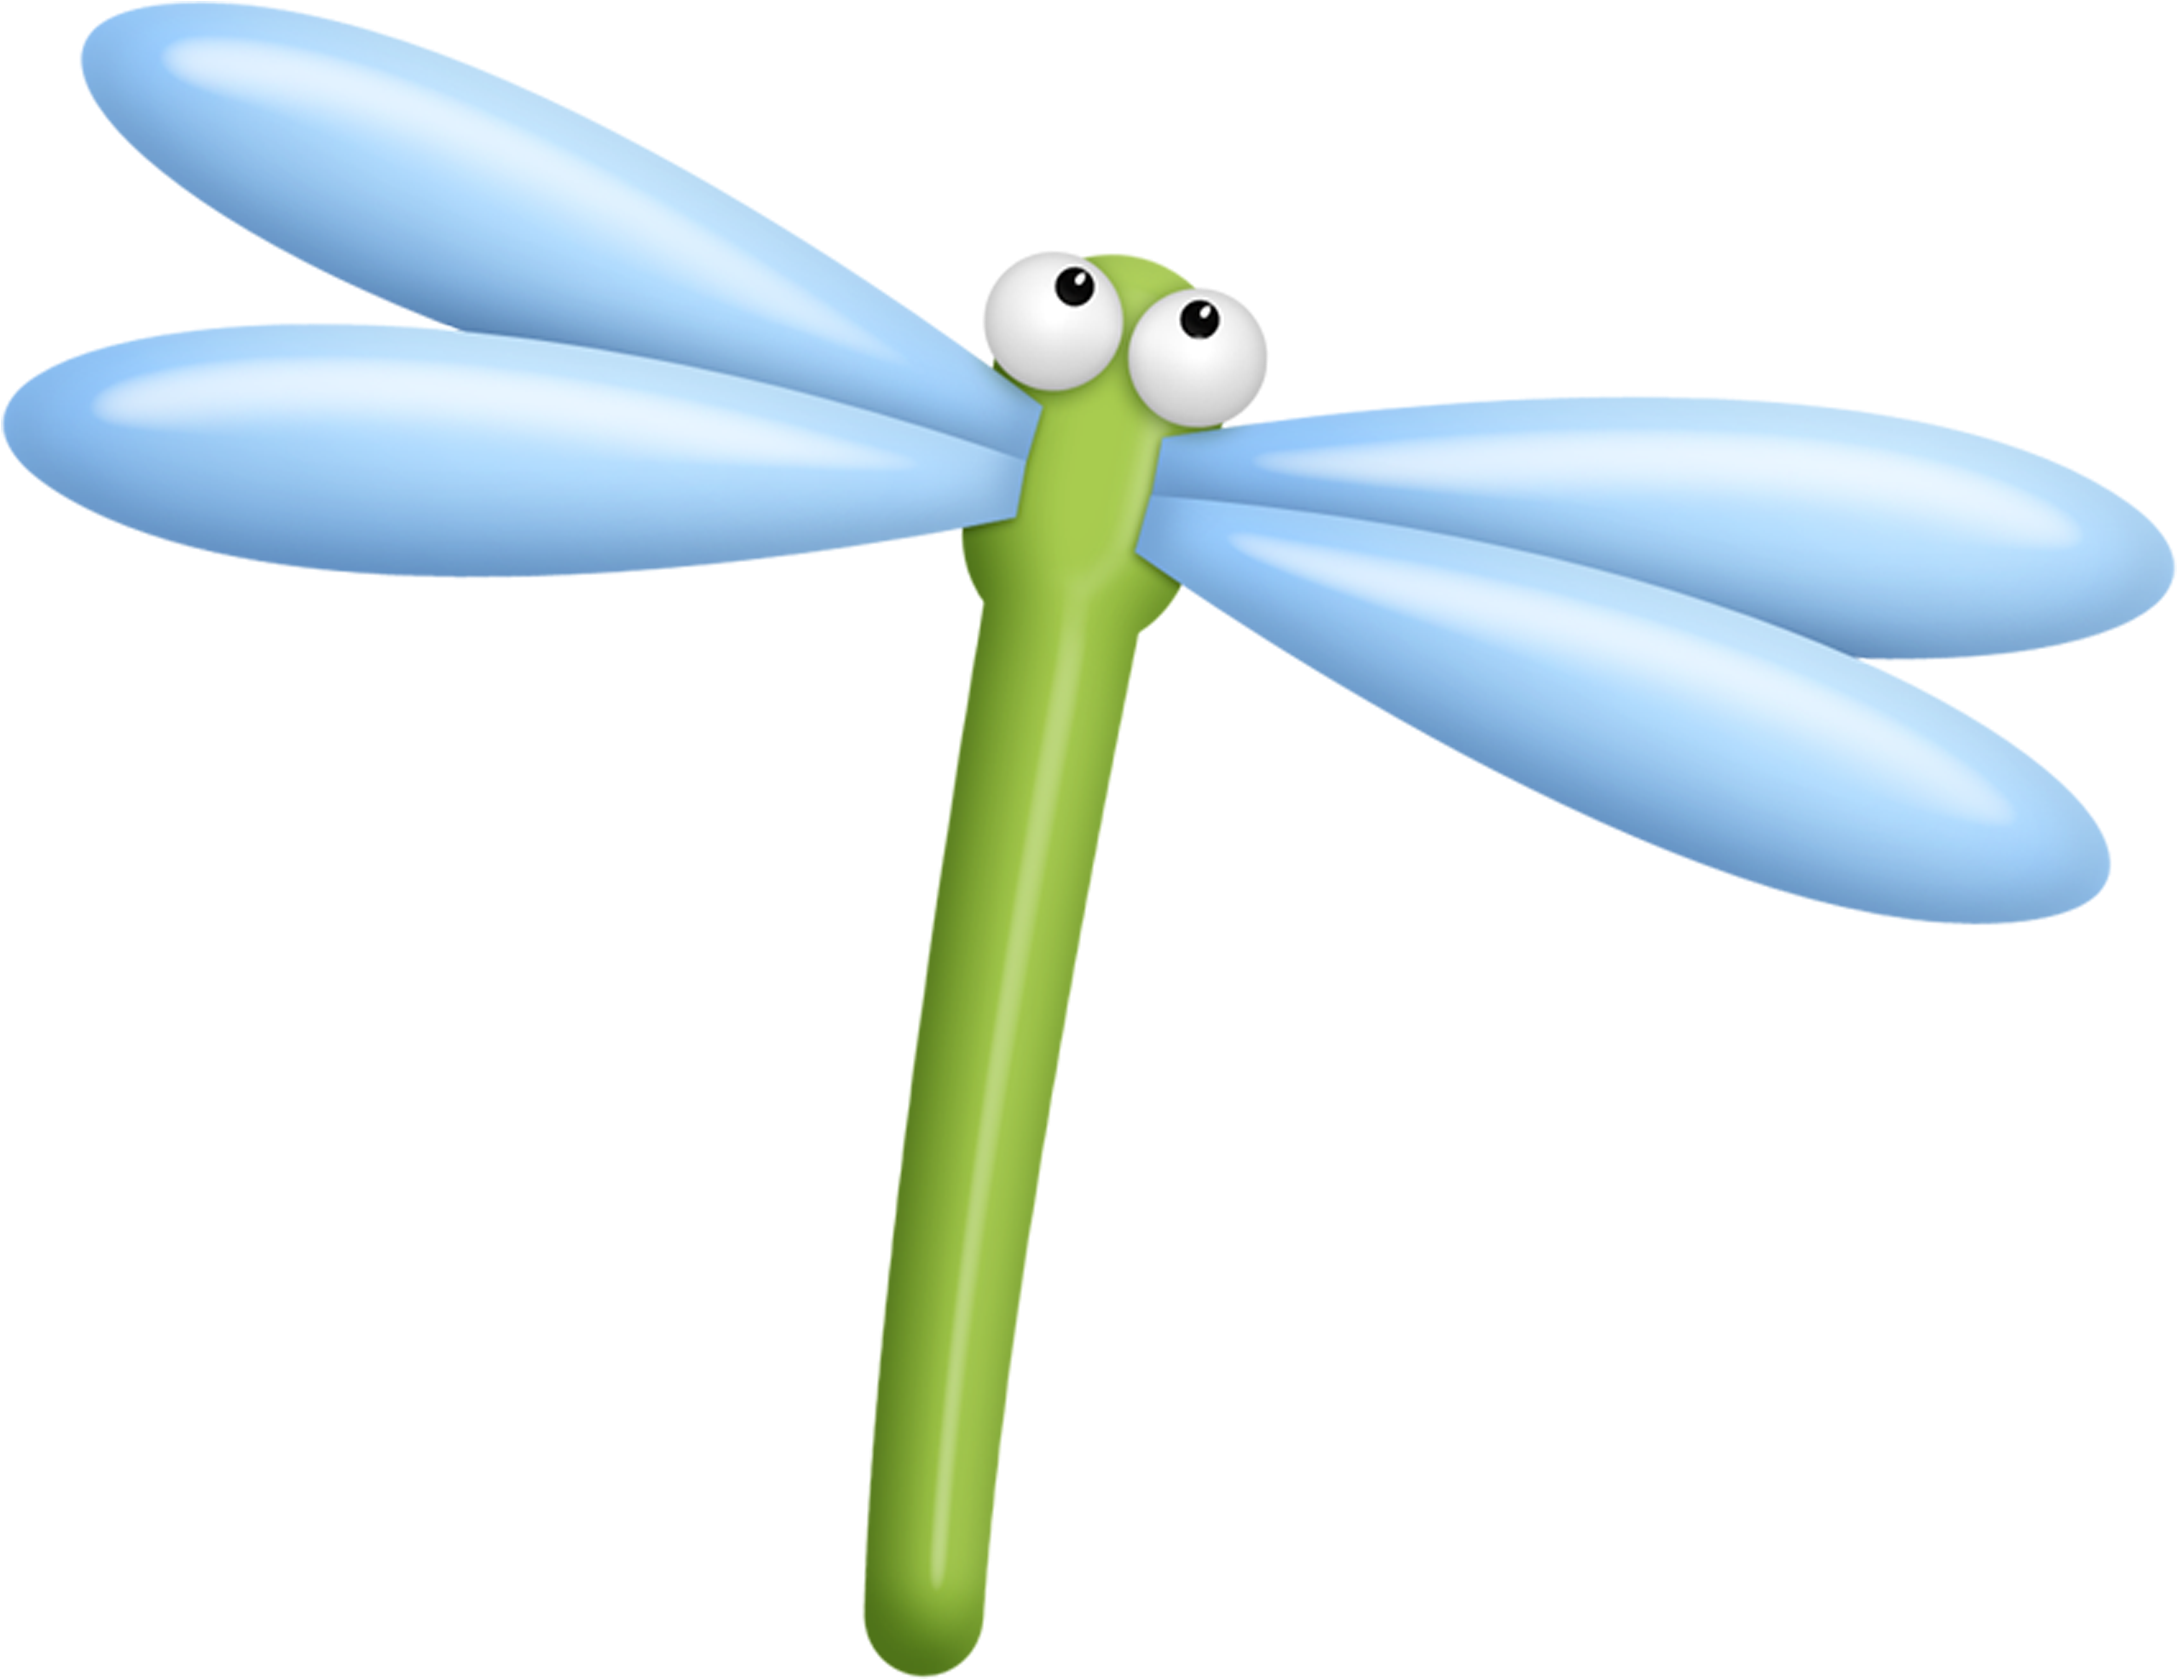 Insect Propeller Cartoon - Dragonfly (2362x2362)